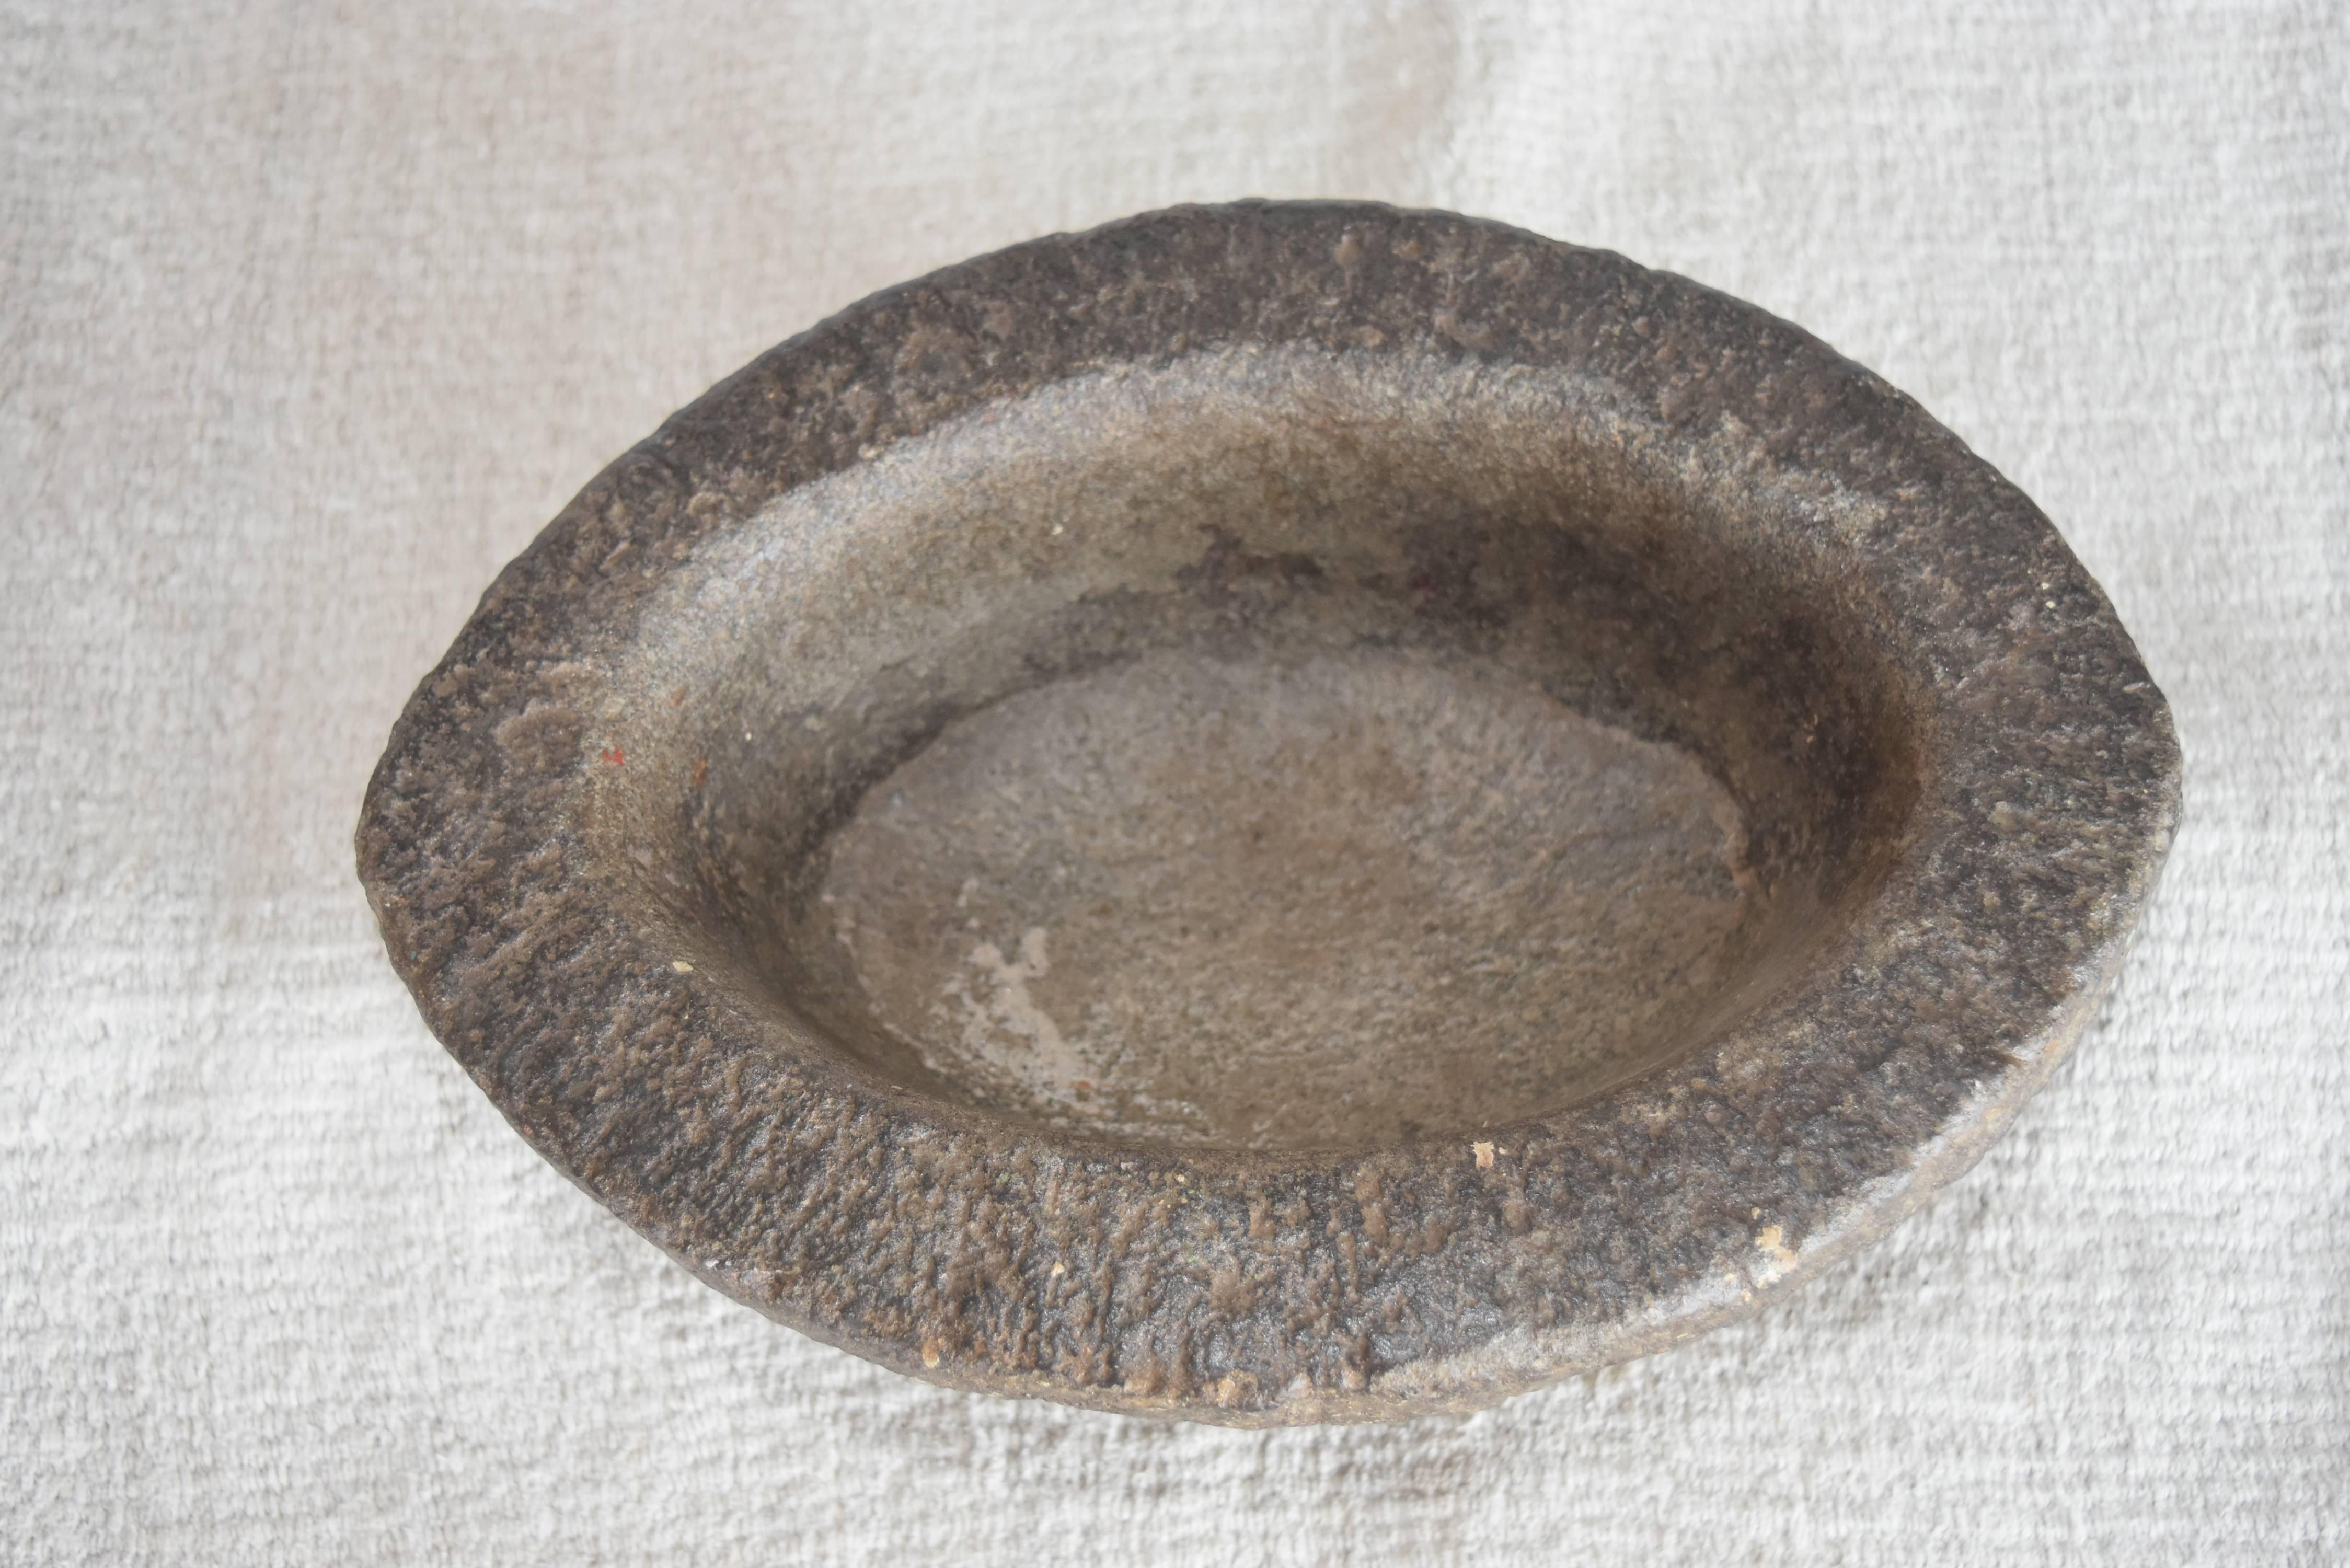 This bowl from India is charcoal gray stone that appears to be granite. It's very heavy for a small bowl, about 20lbs.
I love them for serving nuts, dips or just as a beautiful decoration on a table.